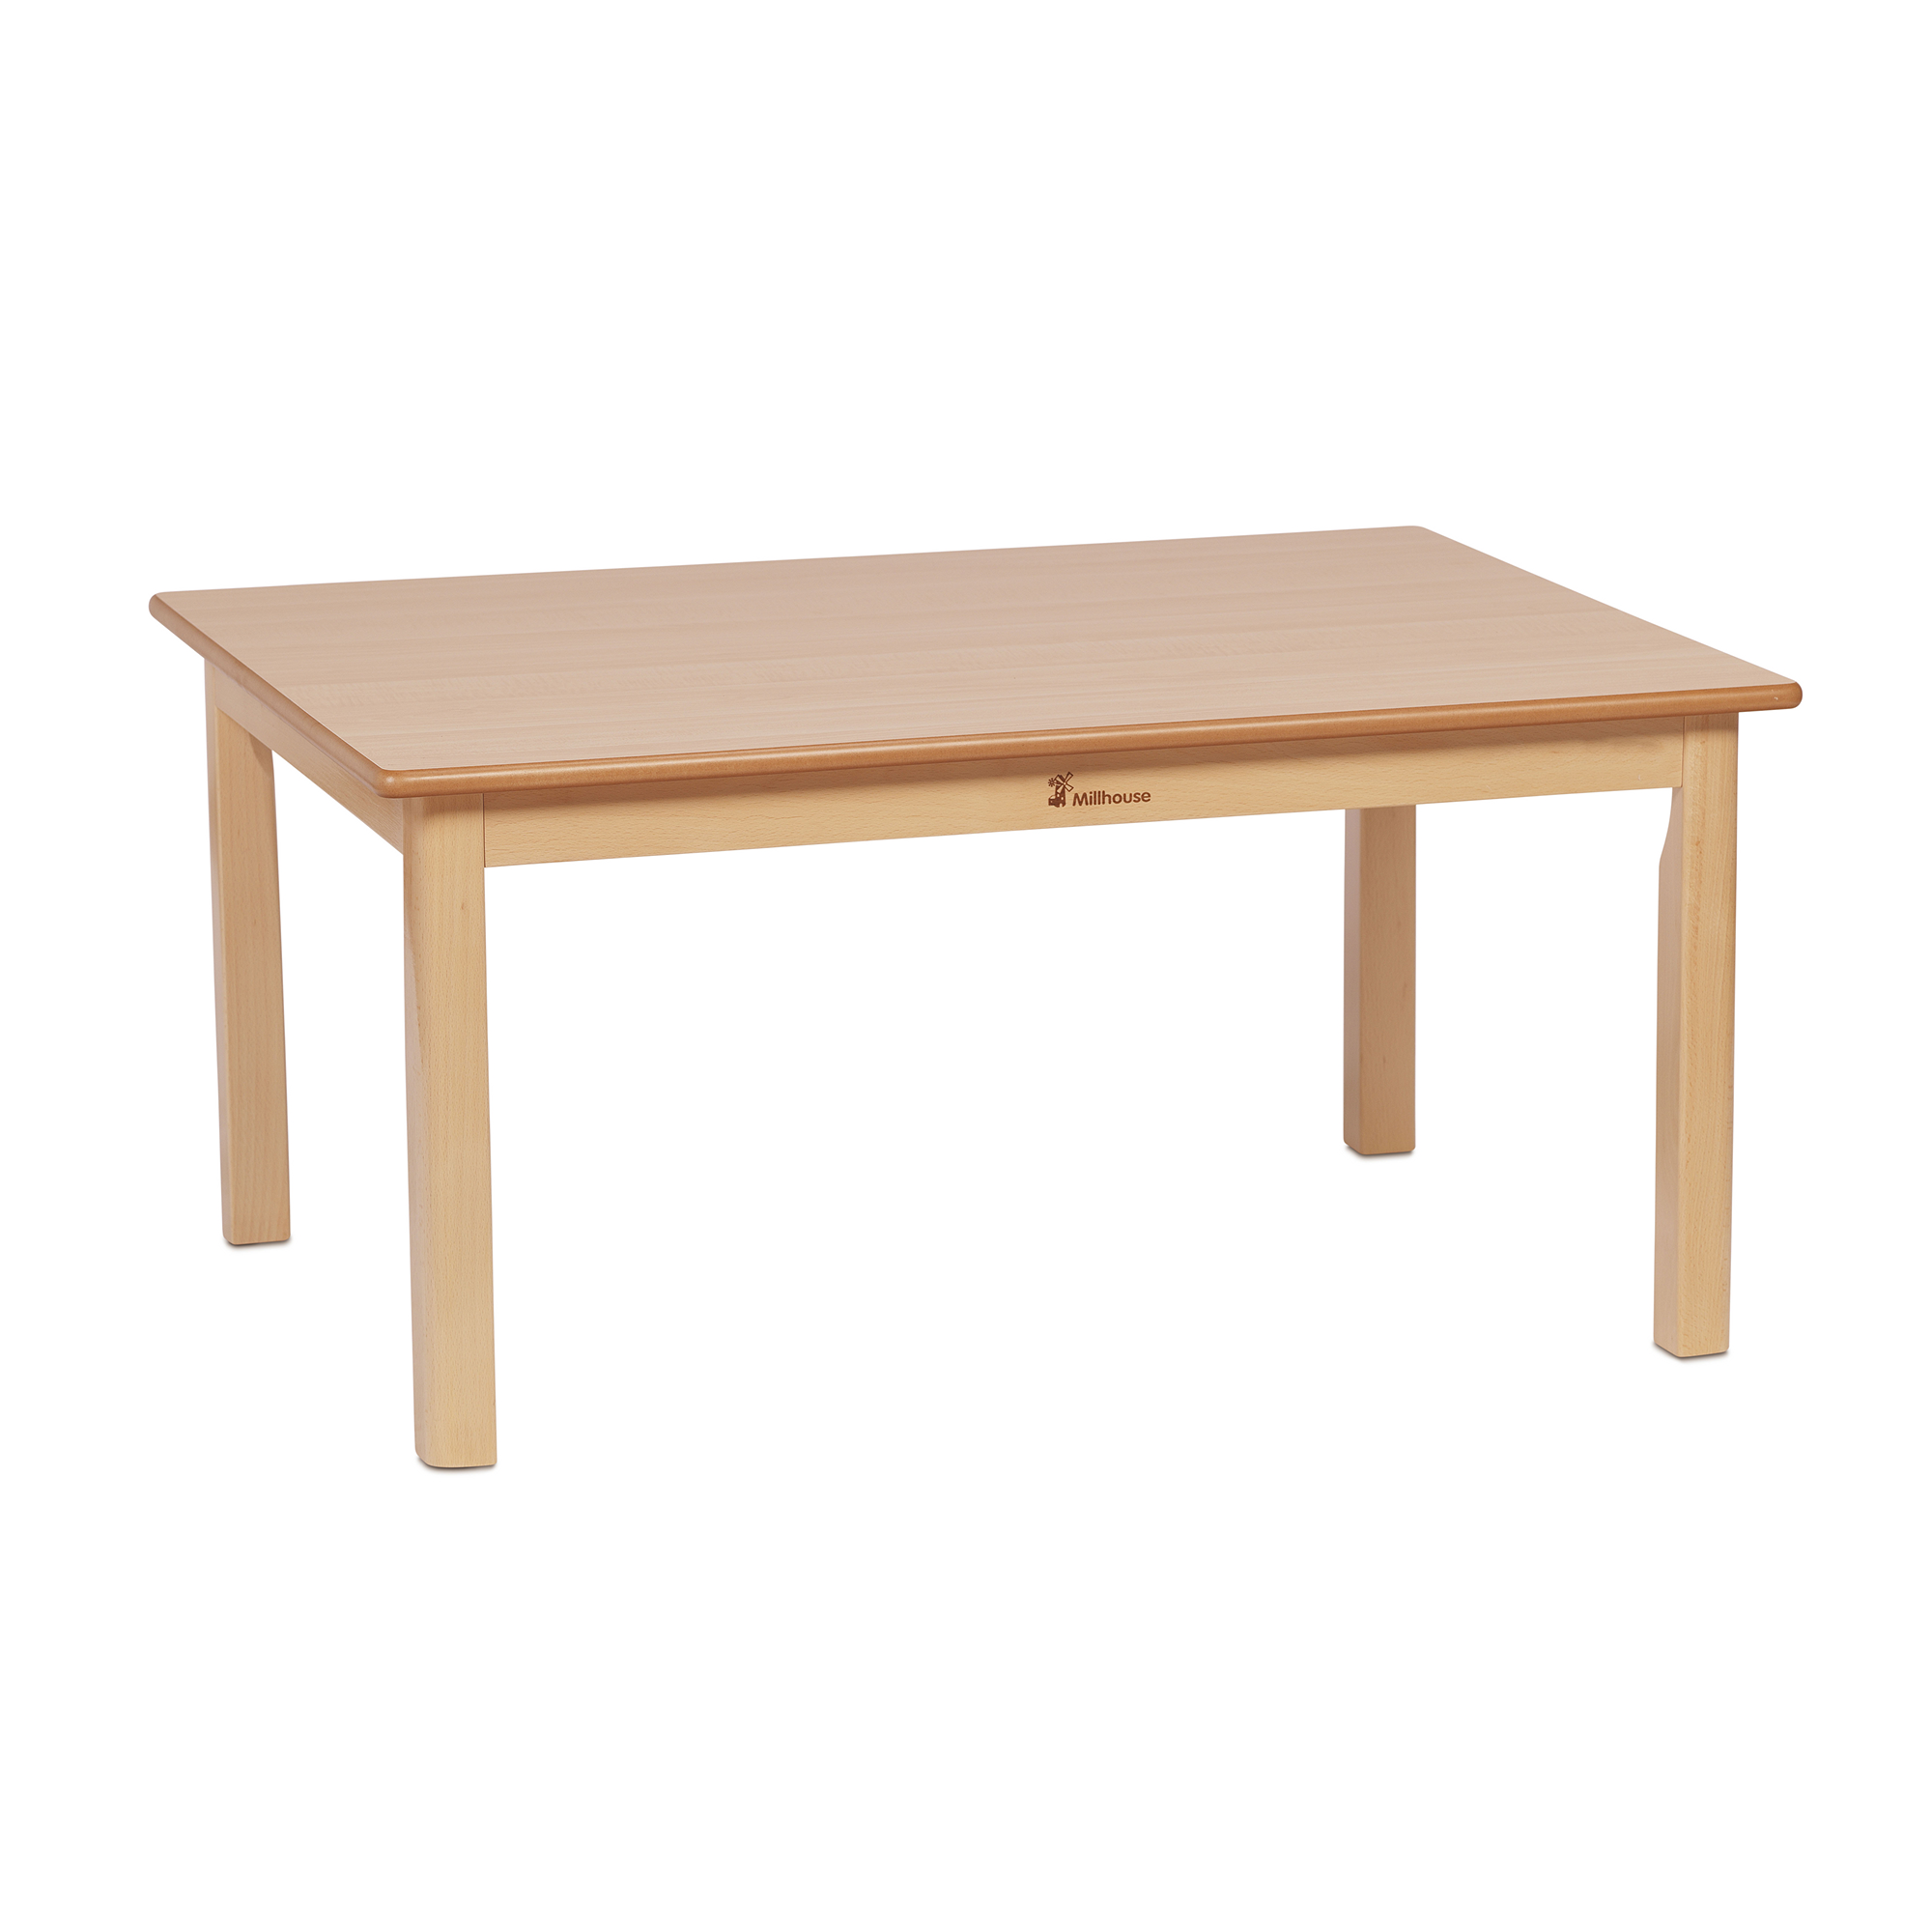 Millhouse Small Tables - H590mm